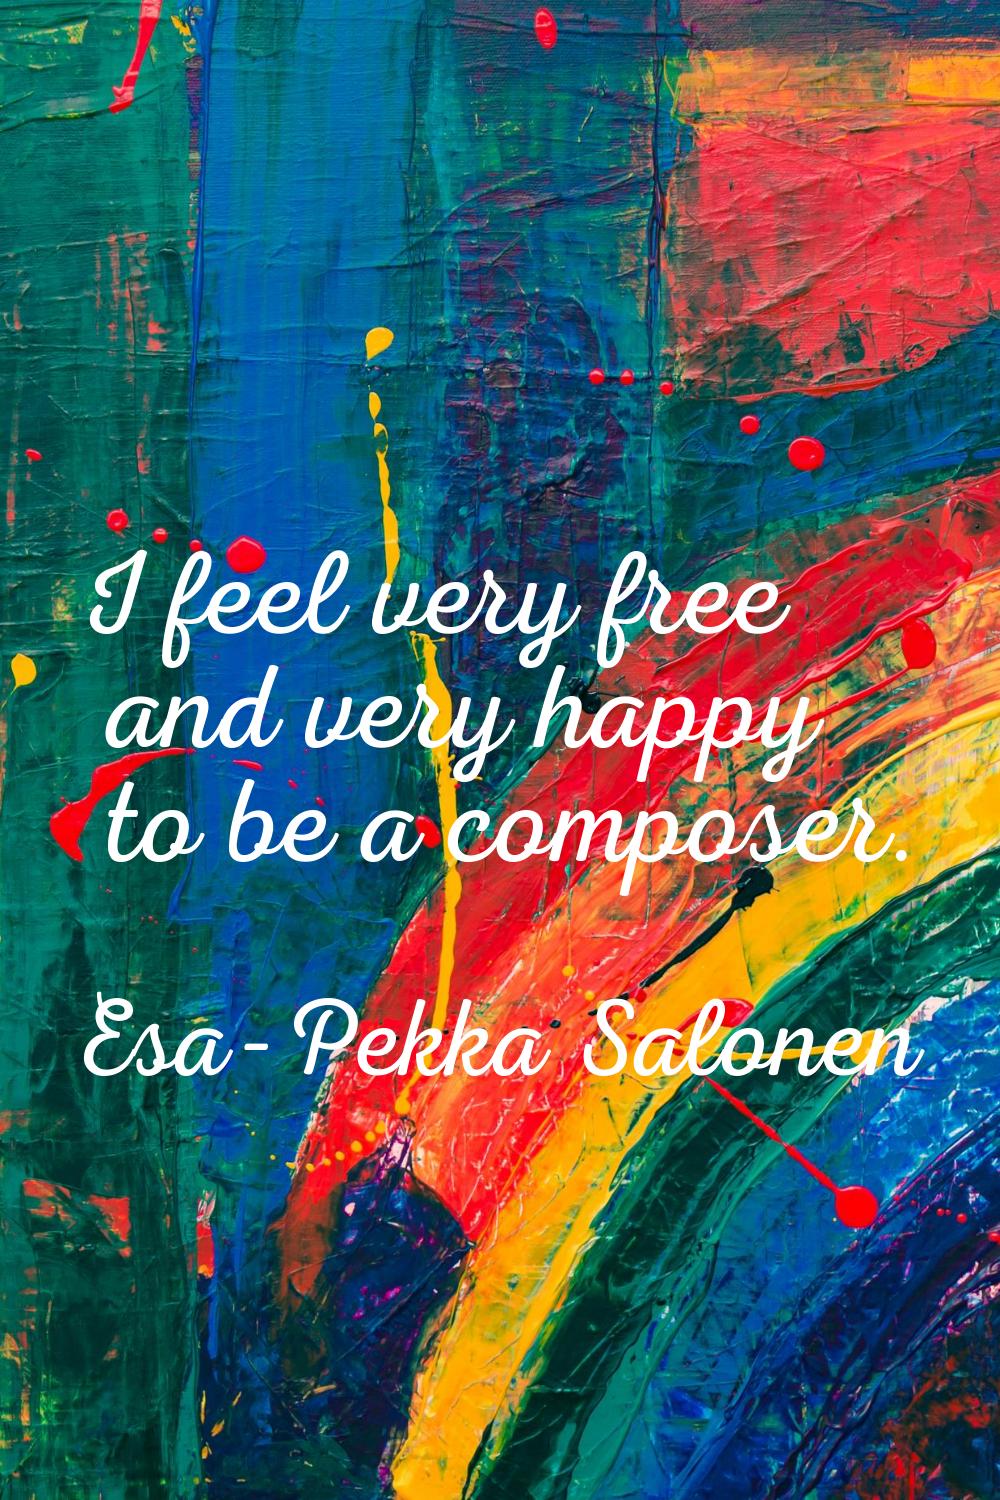 I feel very free and very happy to be a composer.